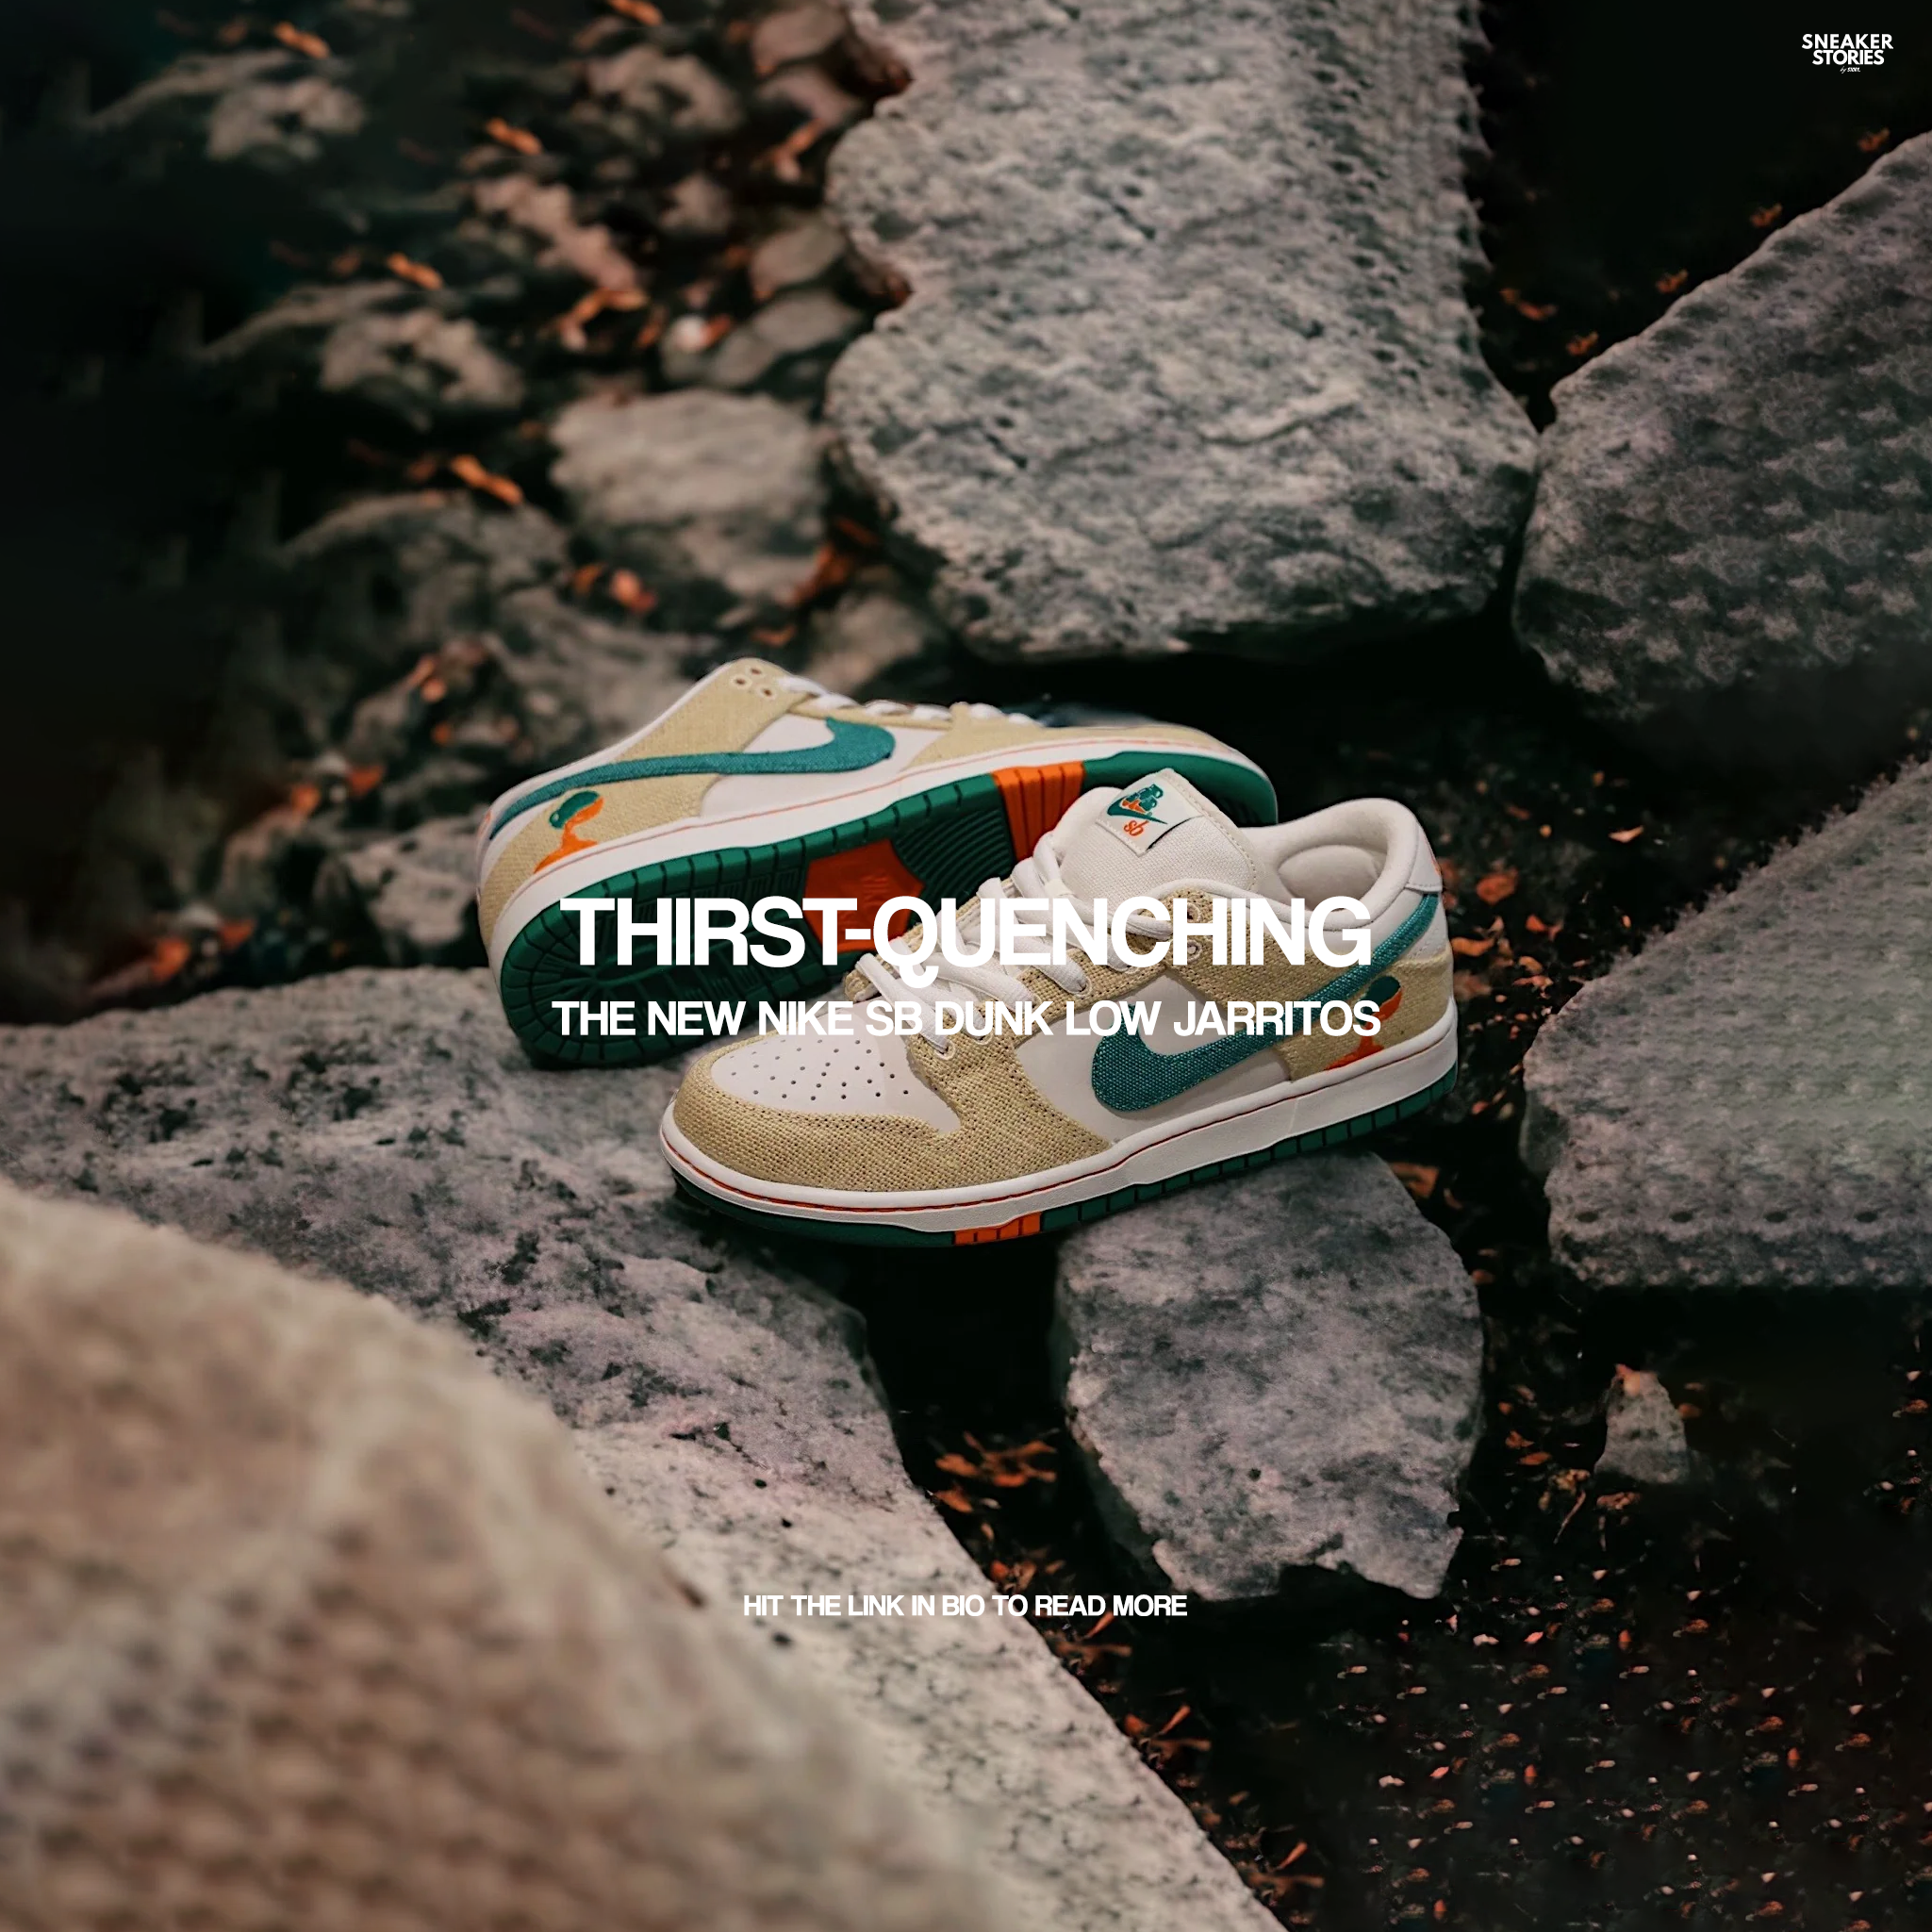 Thirst-Quenching: The new Nike SB Dunk Low Jarritos